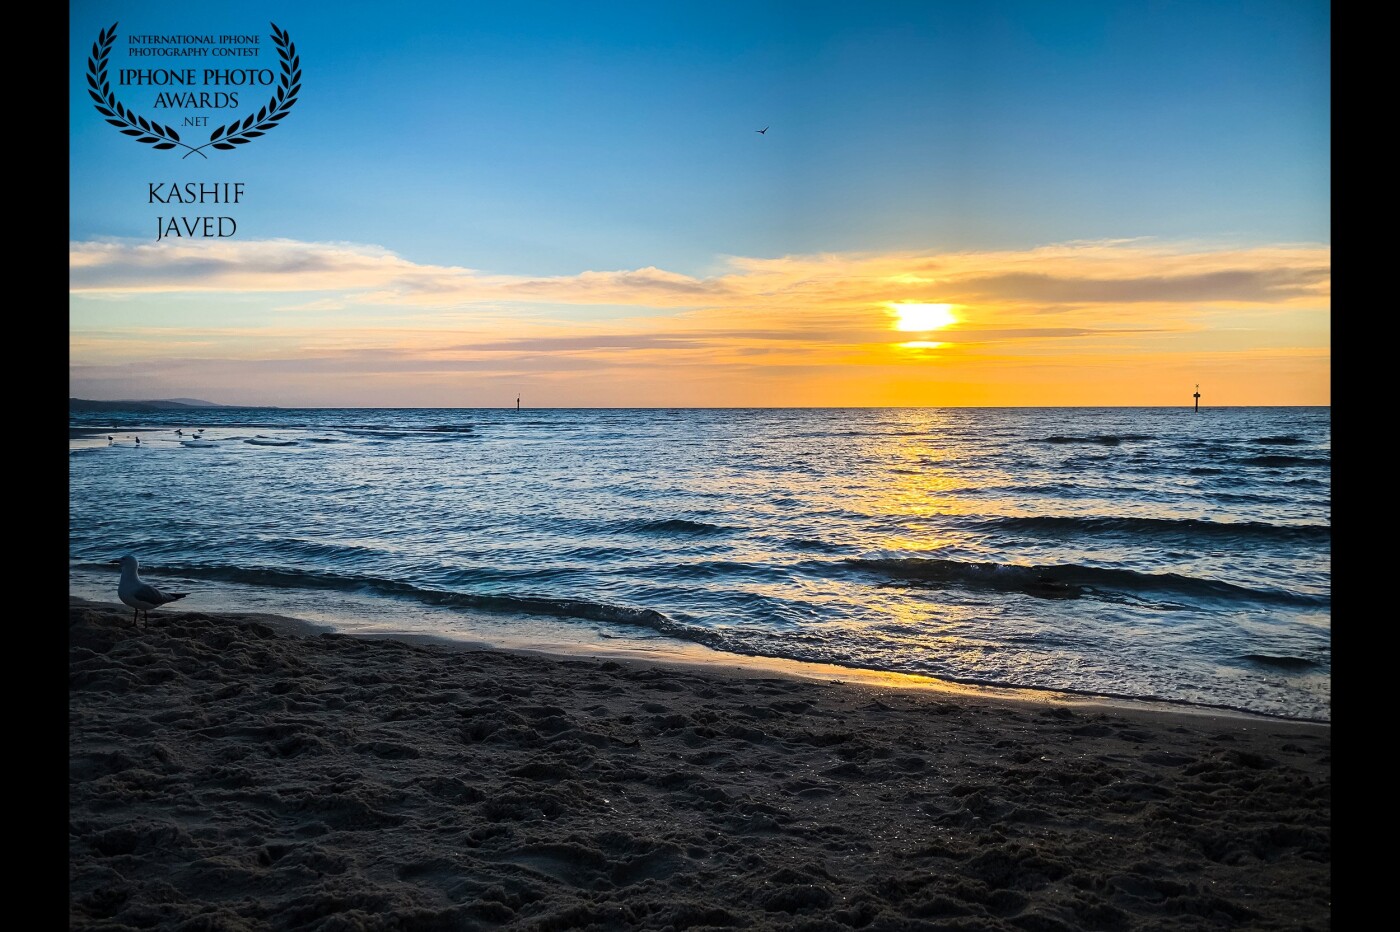 I took this photo at a beach in Melbourne – Australia. Sunsets are very special, no matter how many sunsets one experiences it can never be enough.<br />
<br />
‘To watch a sunset is to connect with the Divine.’ – Gina De Gorna